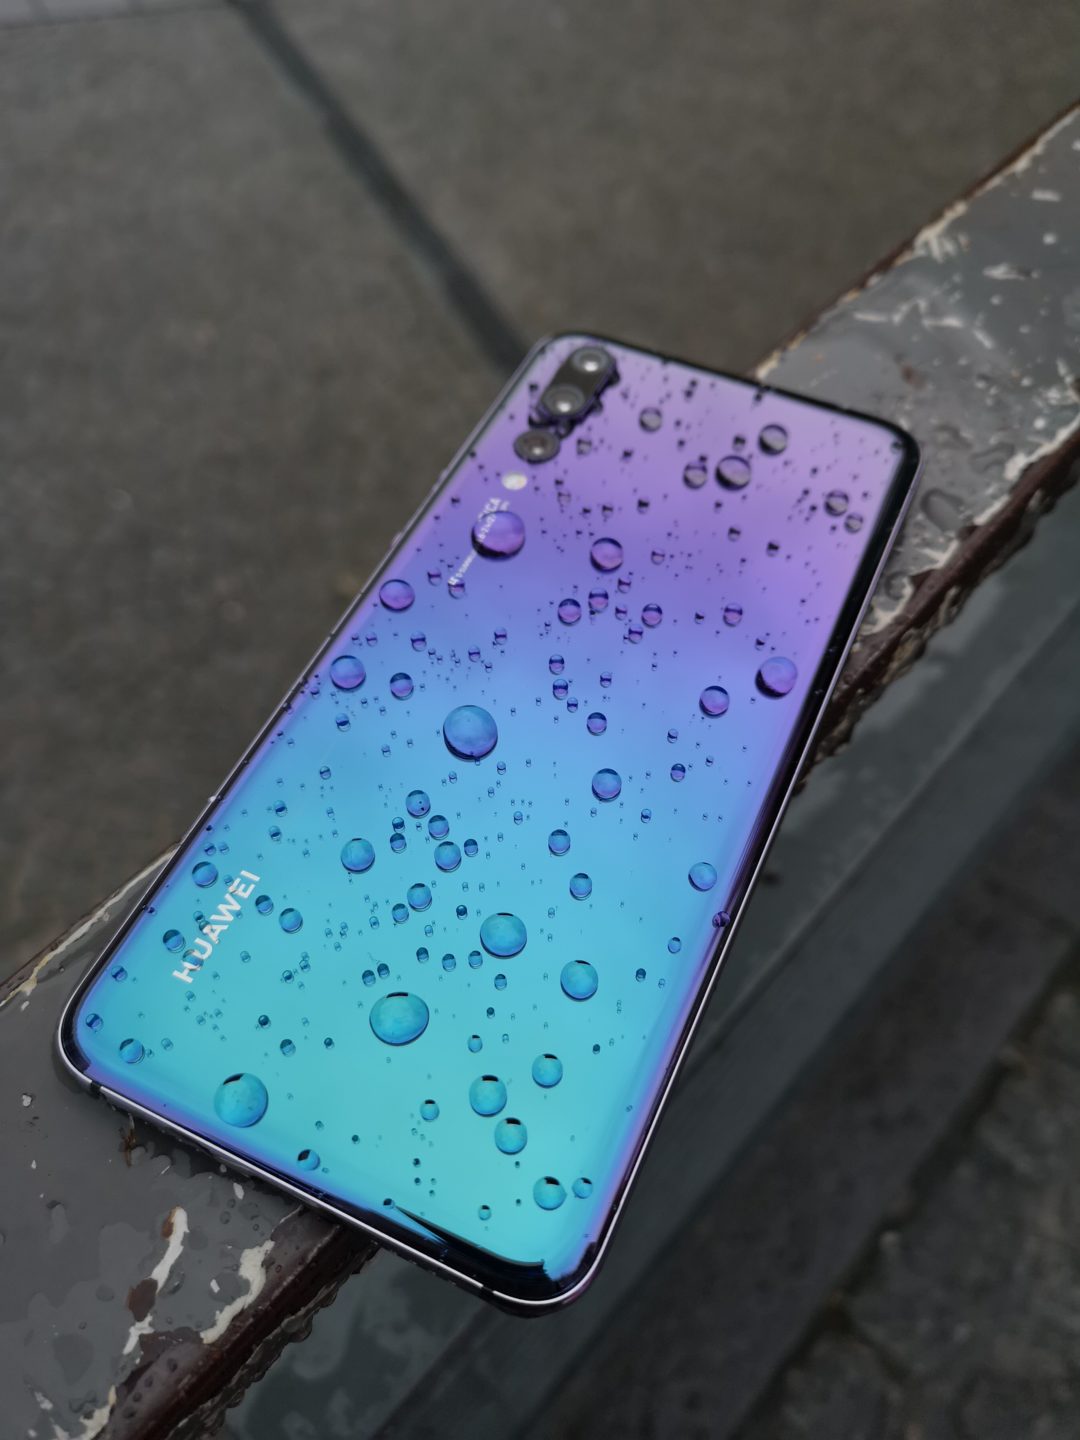 Huawei P20 Pro Initial Take Martin Guay Ottawa Canada Android News All Bytes